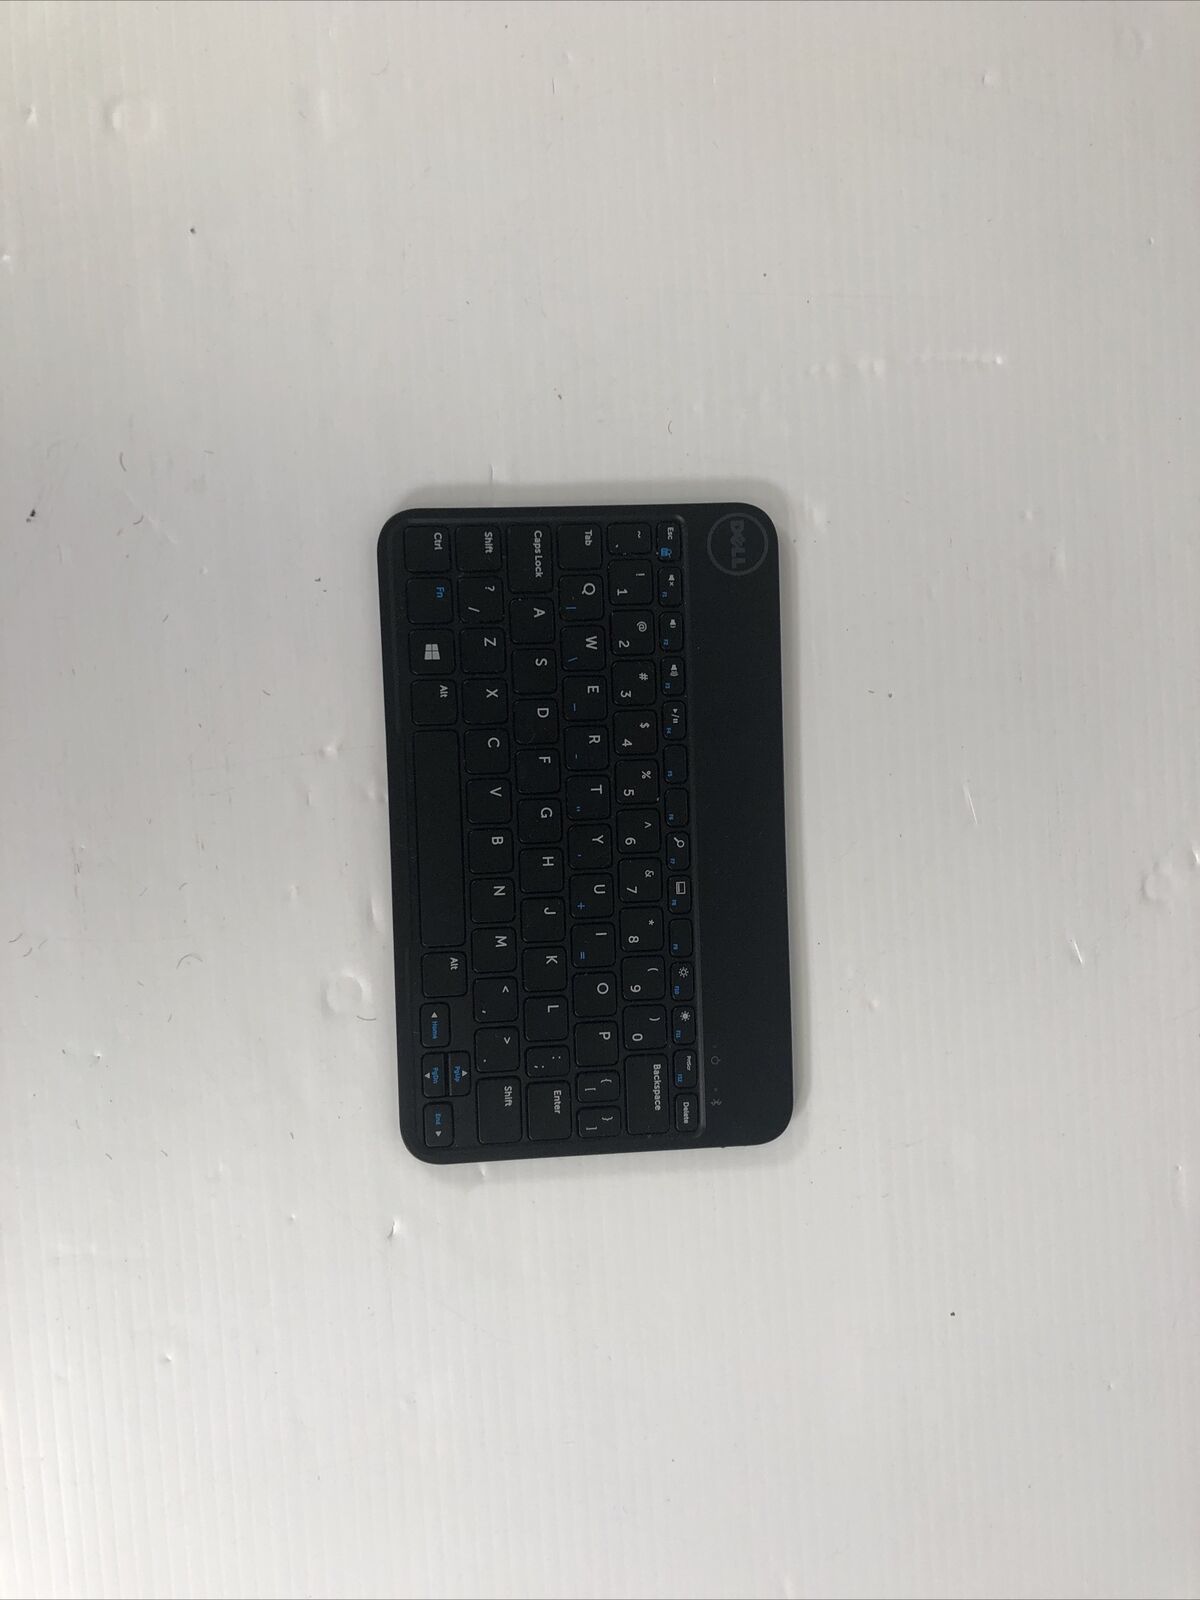 Dell OEM Mobile Wireless Bluetooth Keyboard for Venue 8 Pro Tablet - HP4GD